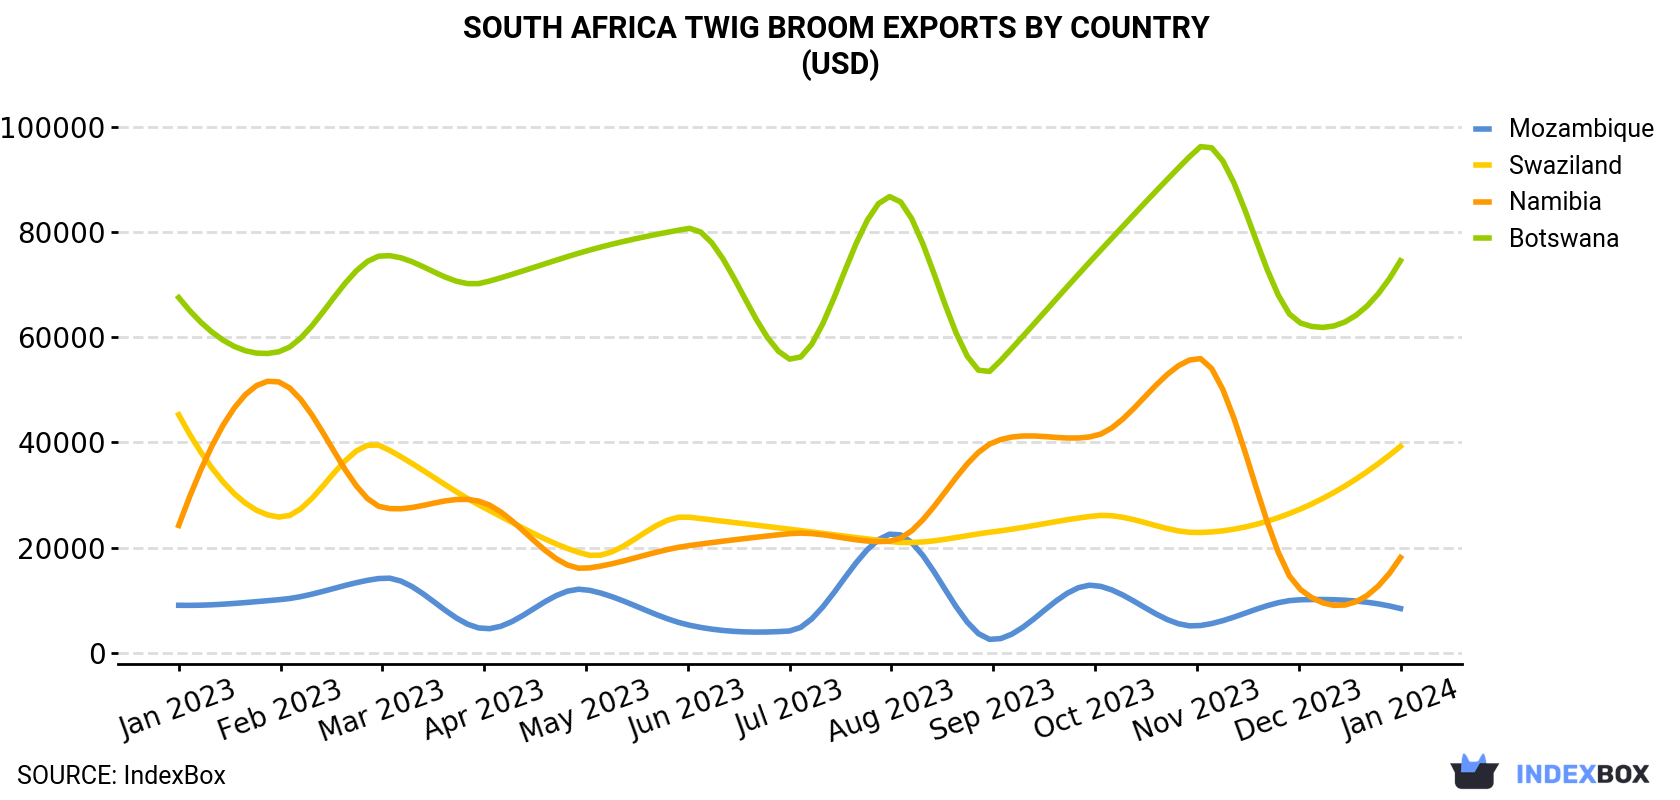 South Africa Twig Broom Exports By Country (USD)